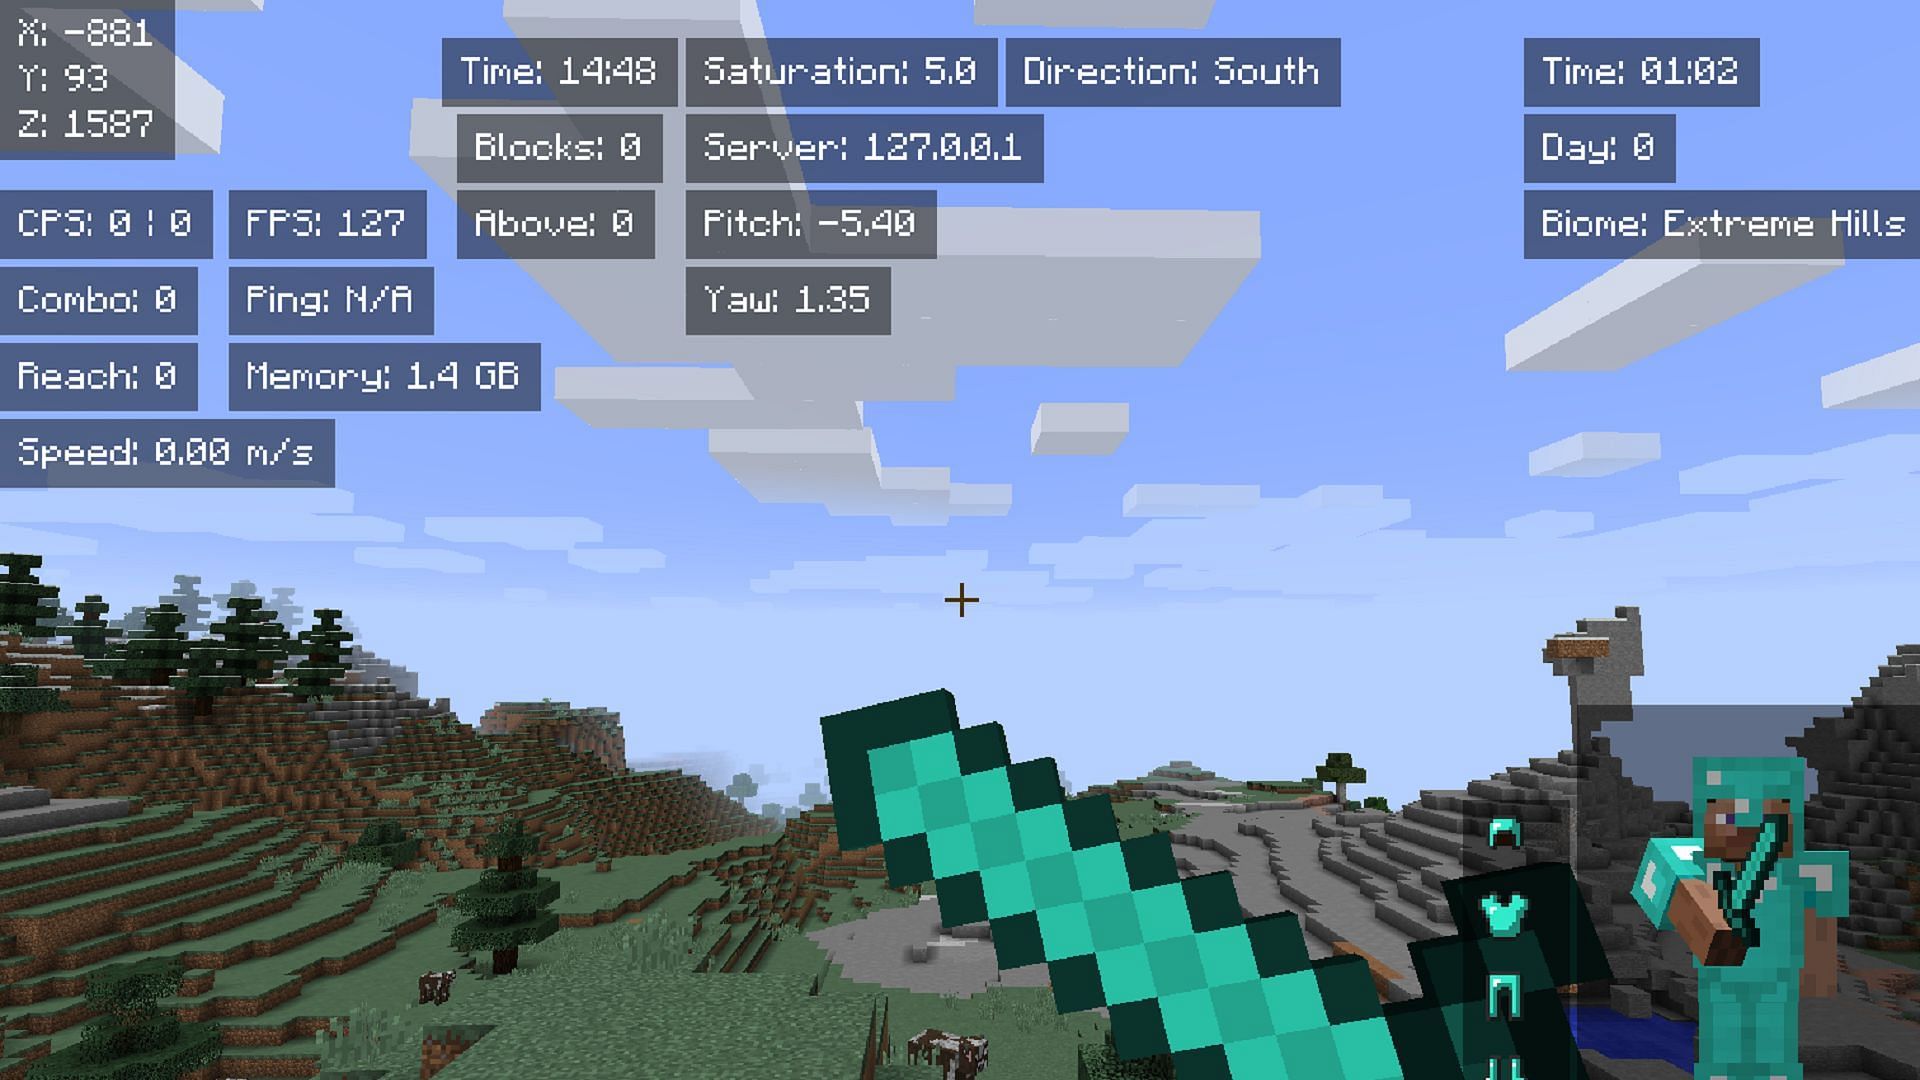 EvergreenHUD adds helpful information for Minecraft PvP, minigames, and more (Image via Polyfrost/Modrinth)